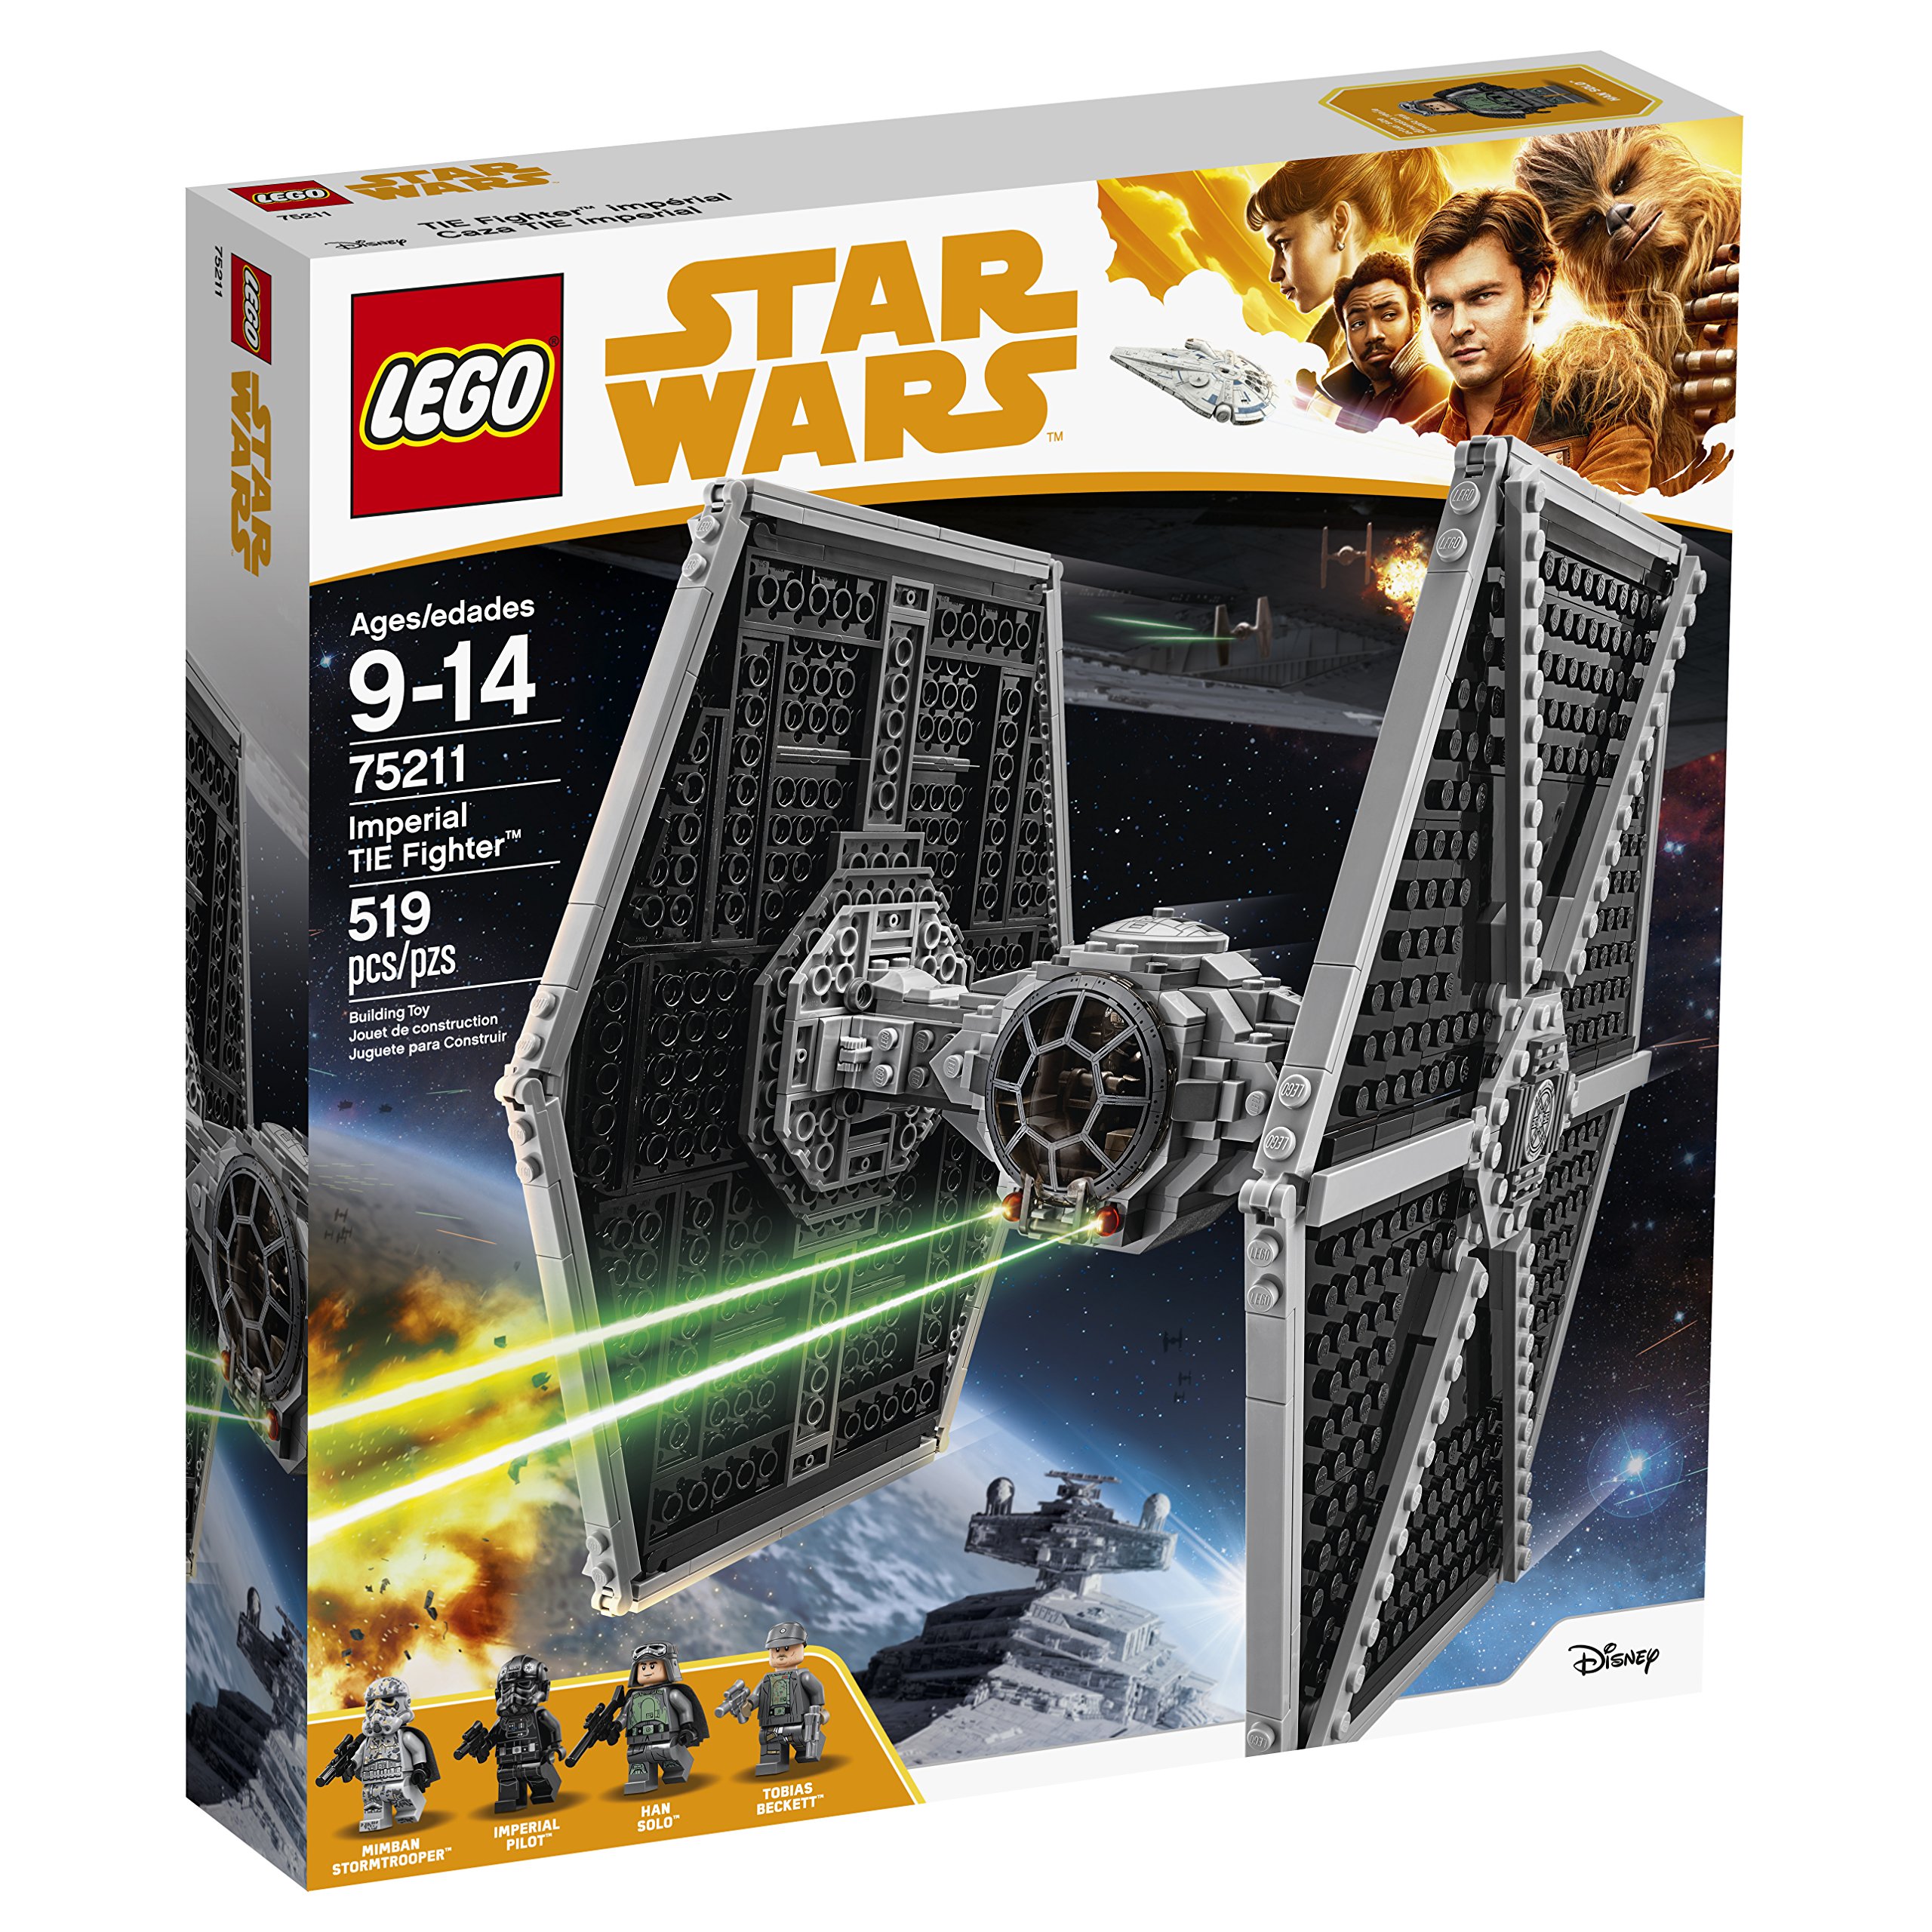 LEGO Star Wars Imperial TIE Fighter 75211 Building Kit (519 Pieces)